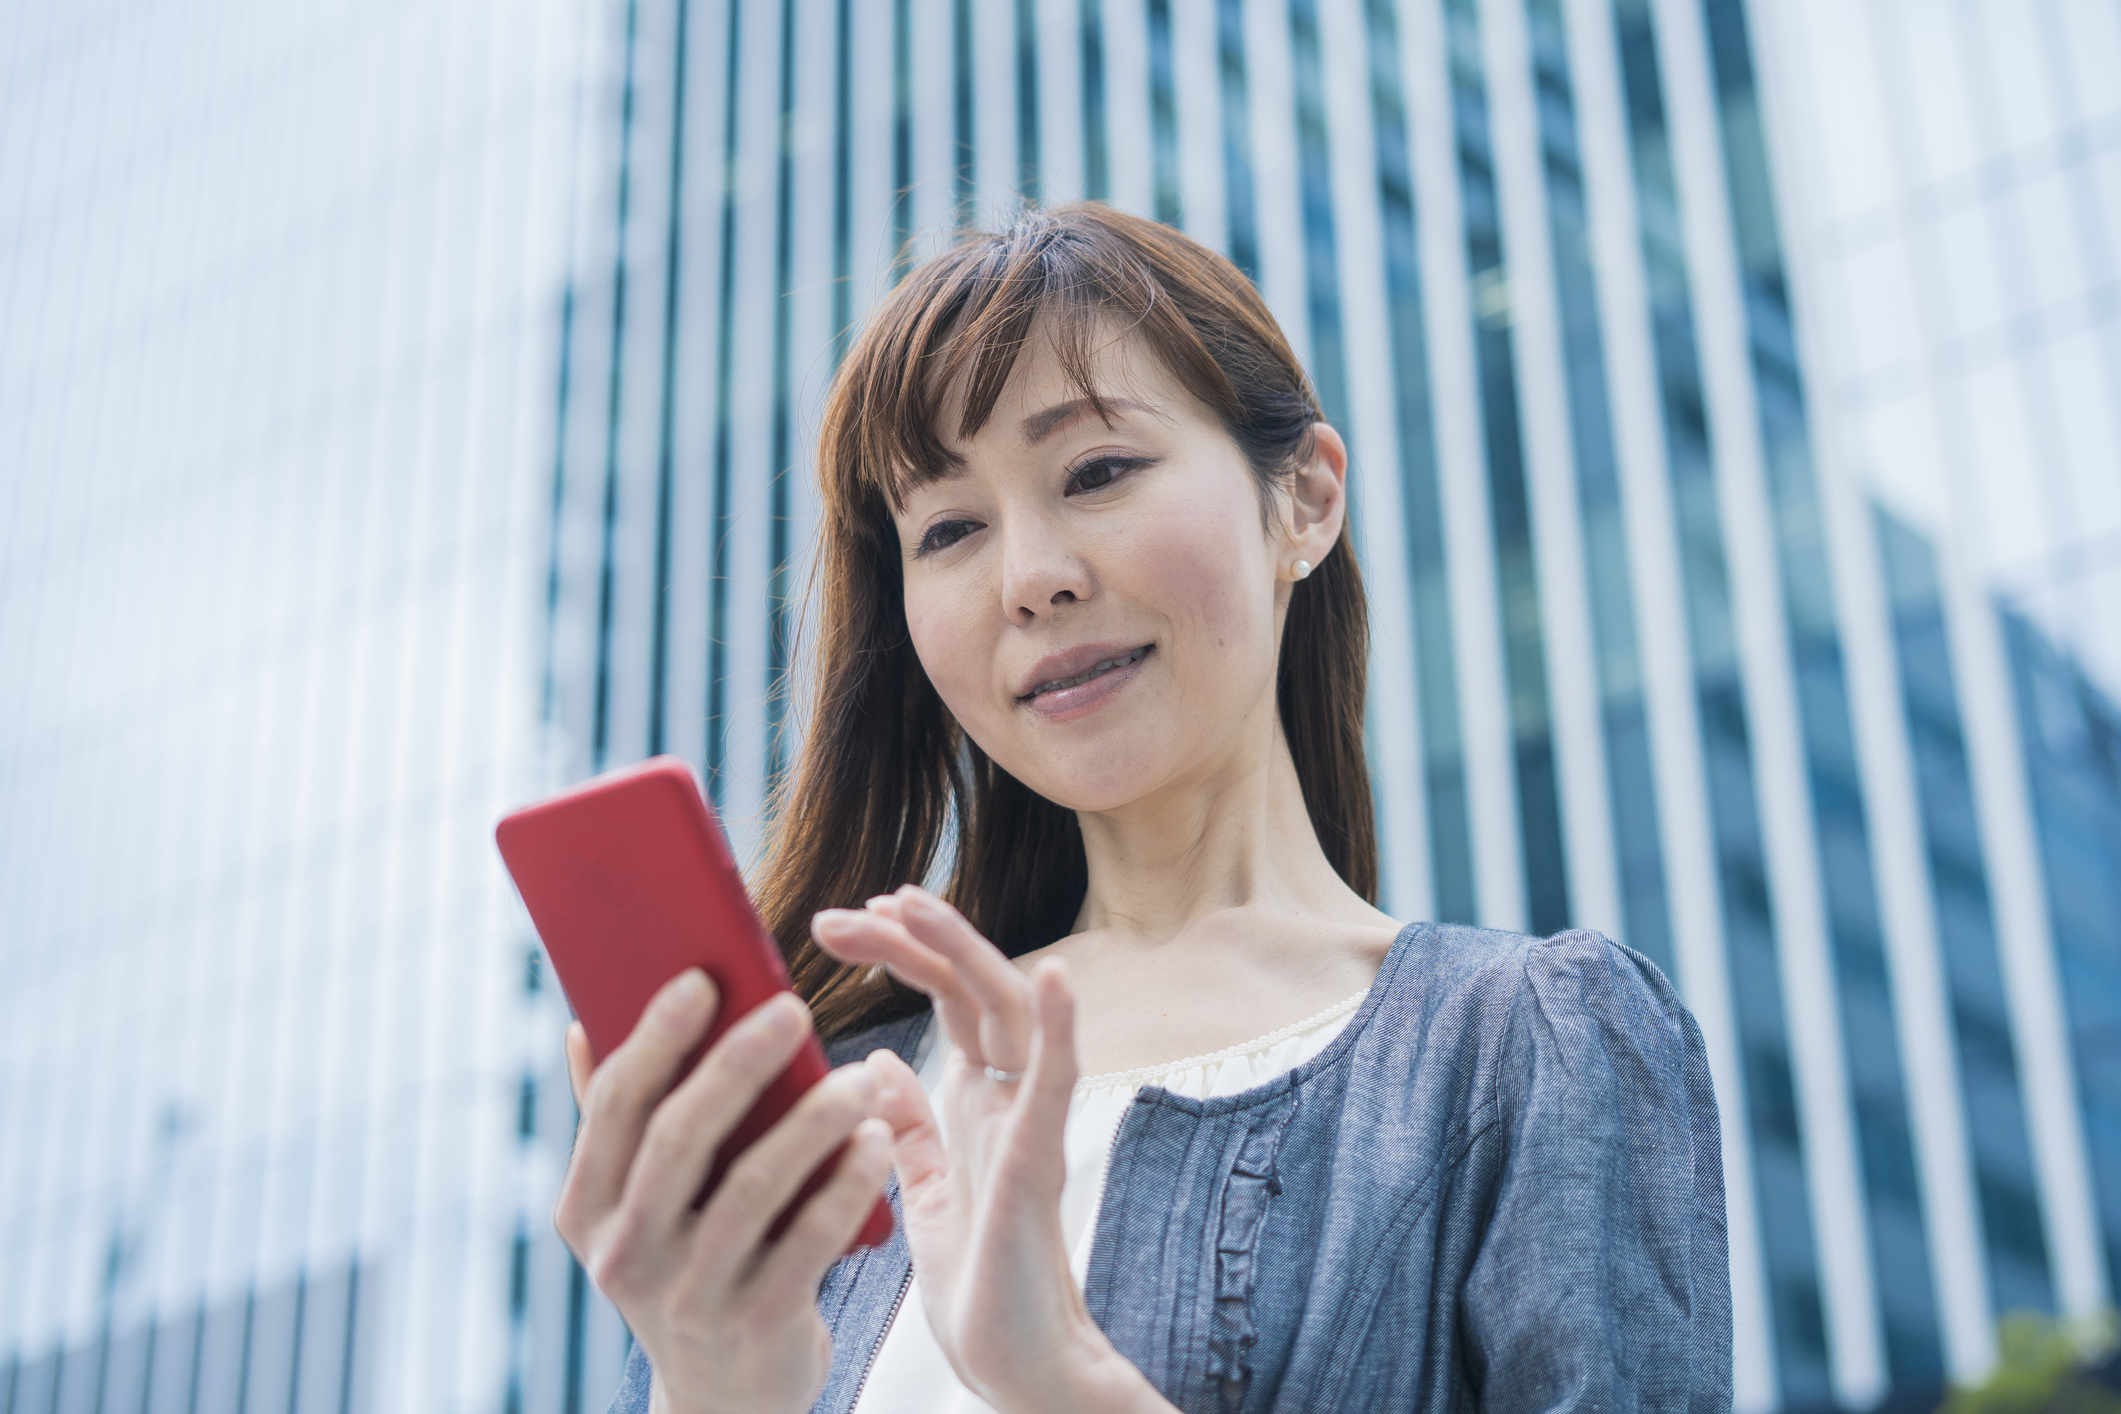 Business woman using a smartphone